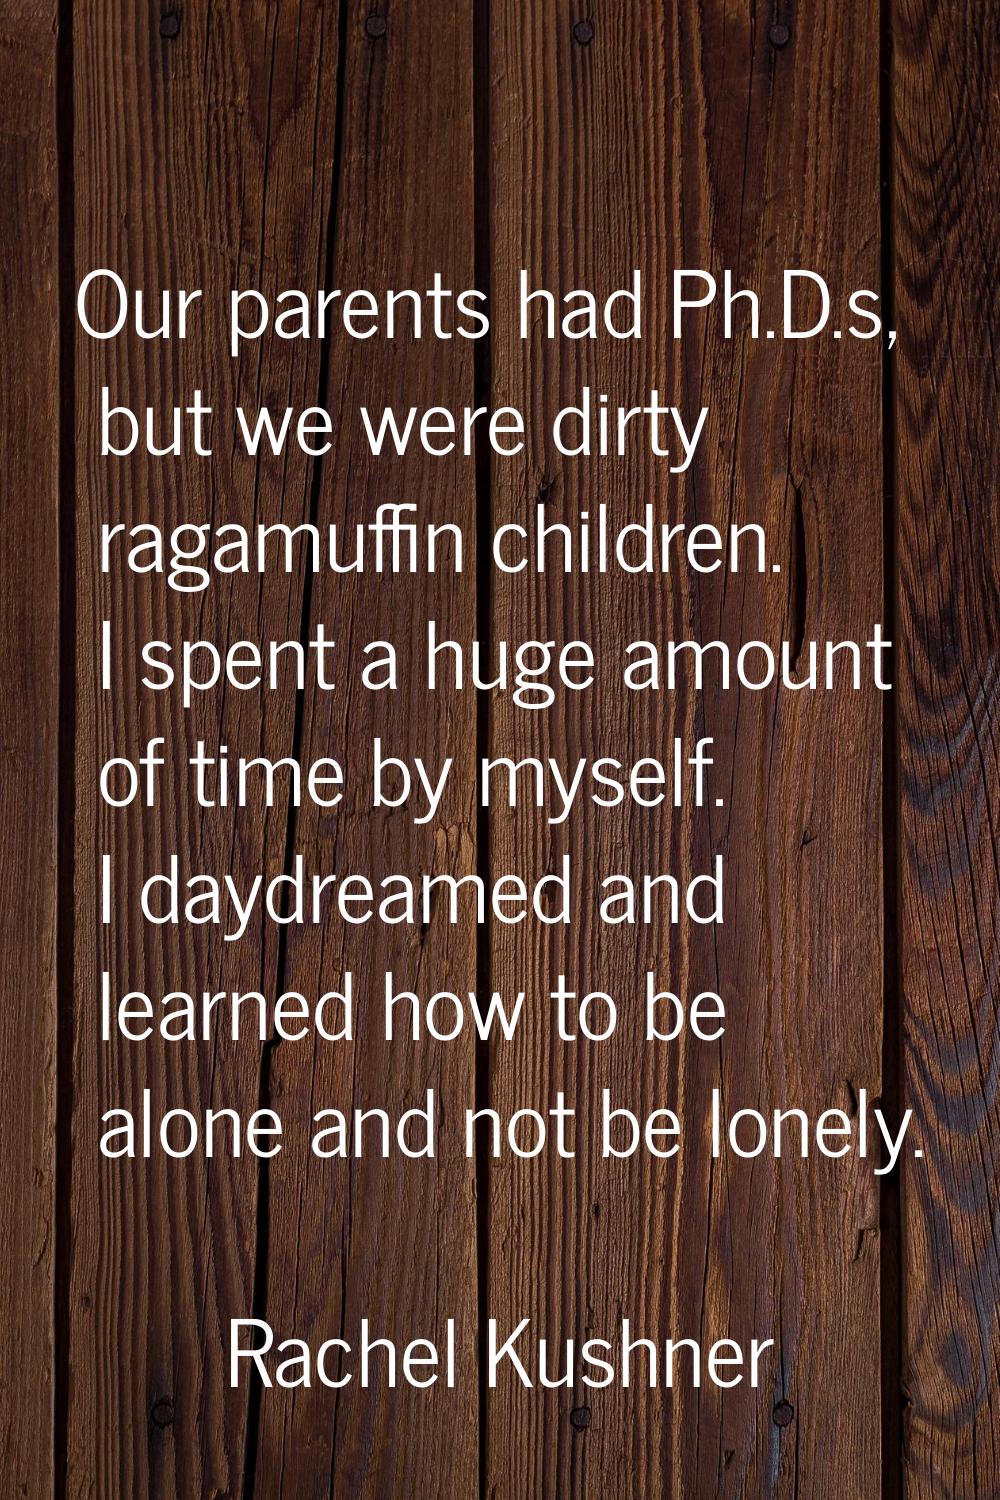 Our parents had Ph.D.s, but we were dirty ragamuffin children. I spent a huge amount of time by mys